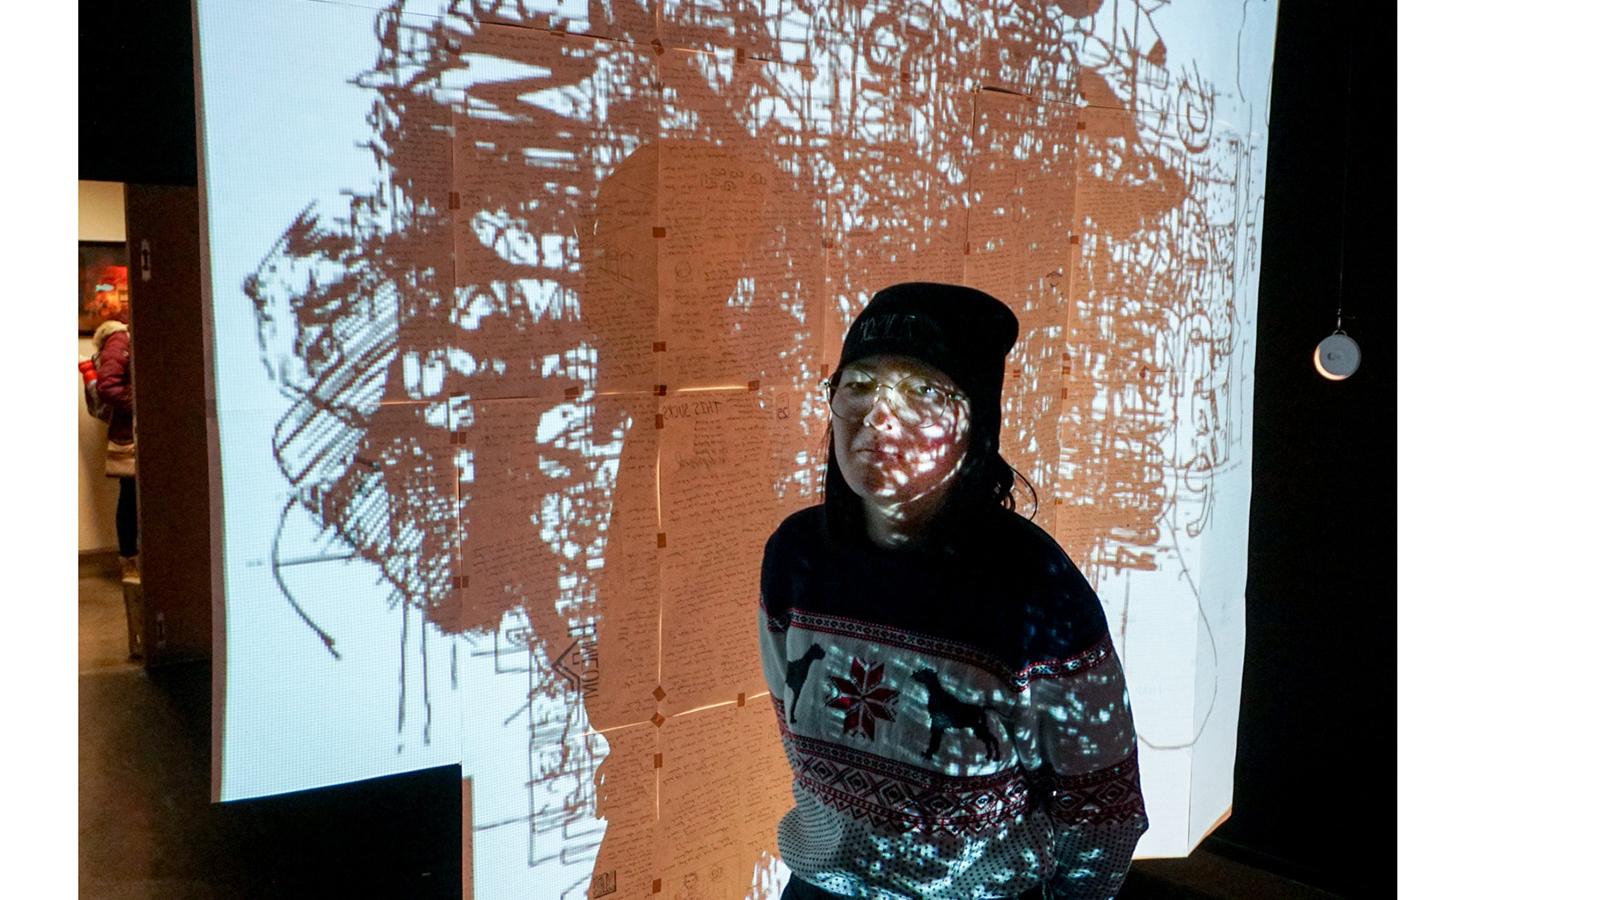 student in front of projected work